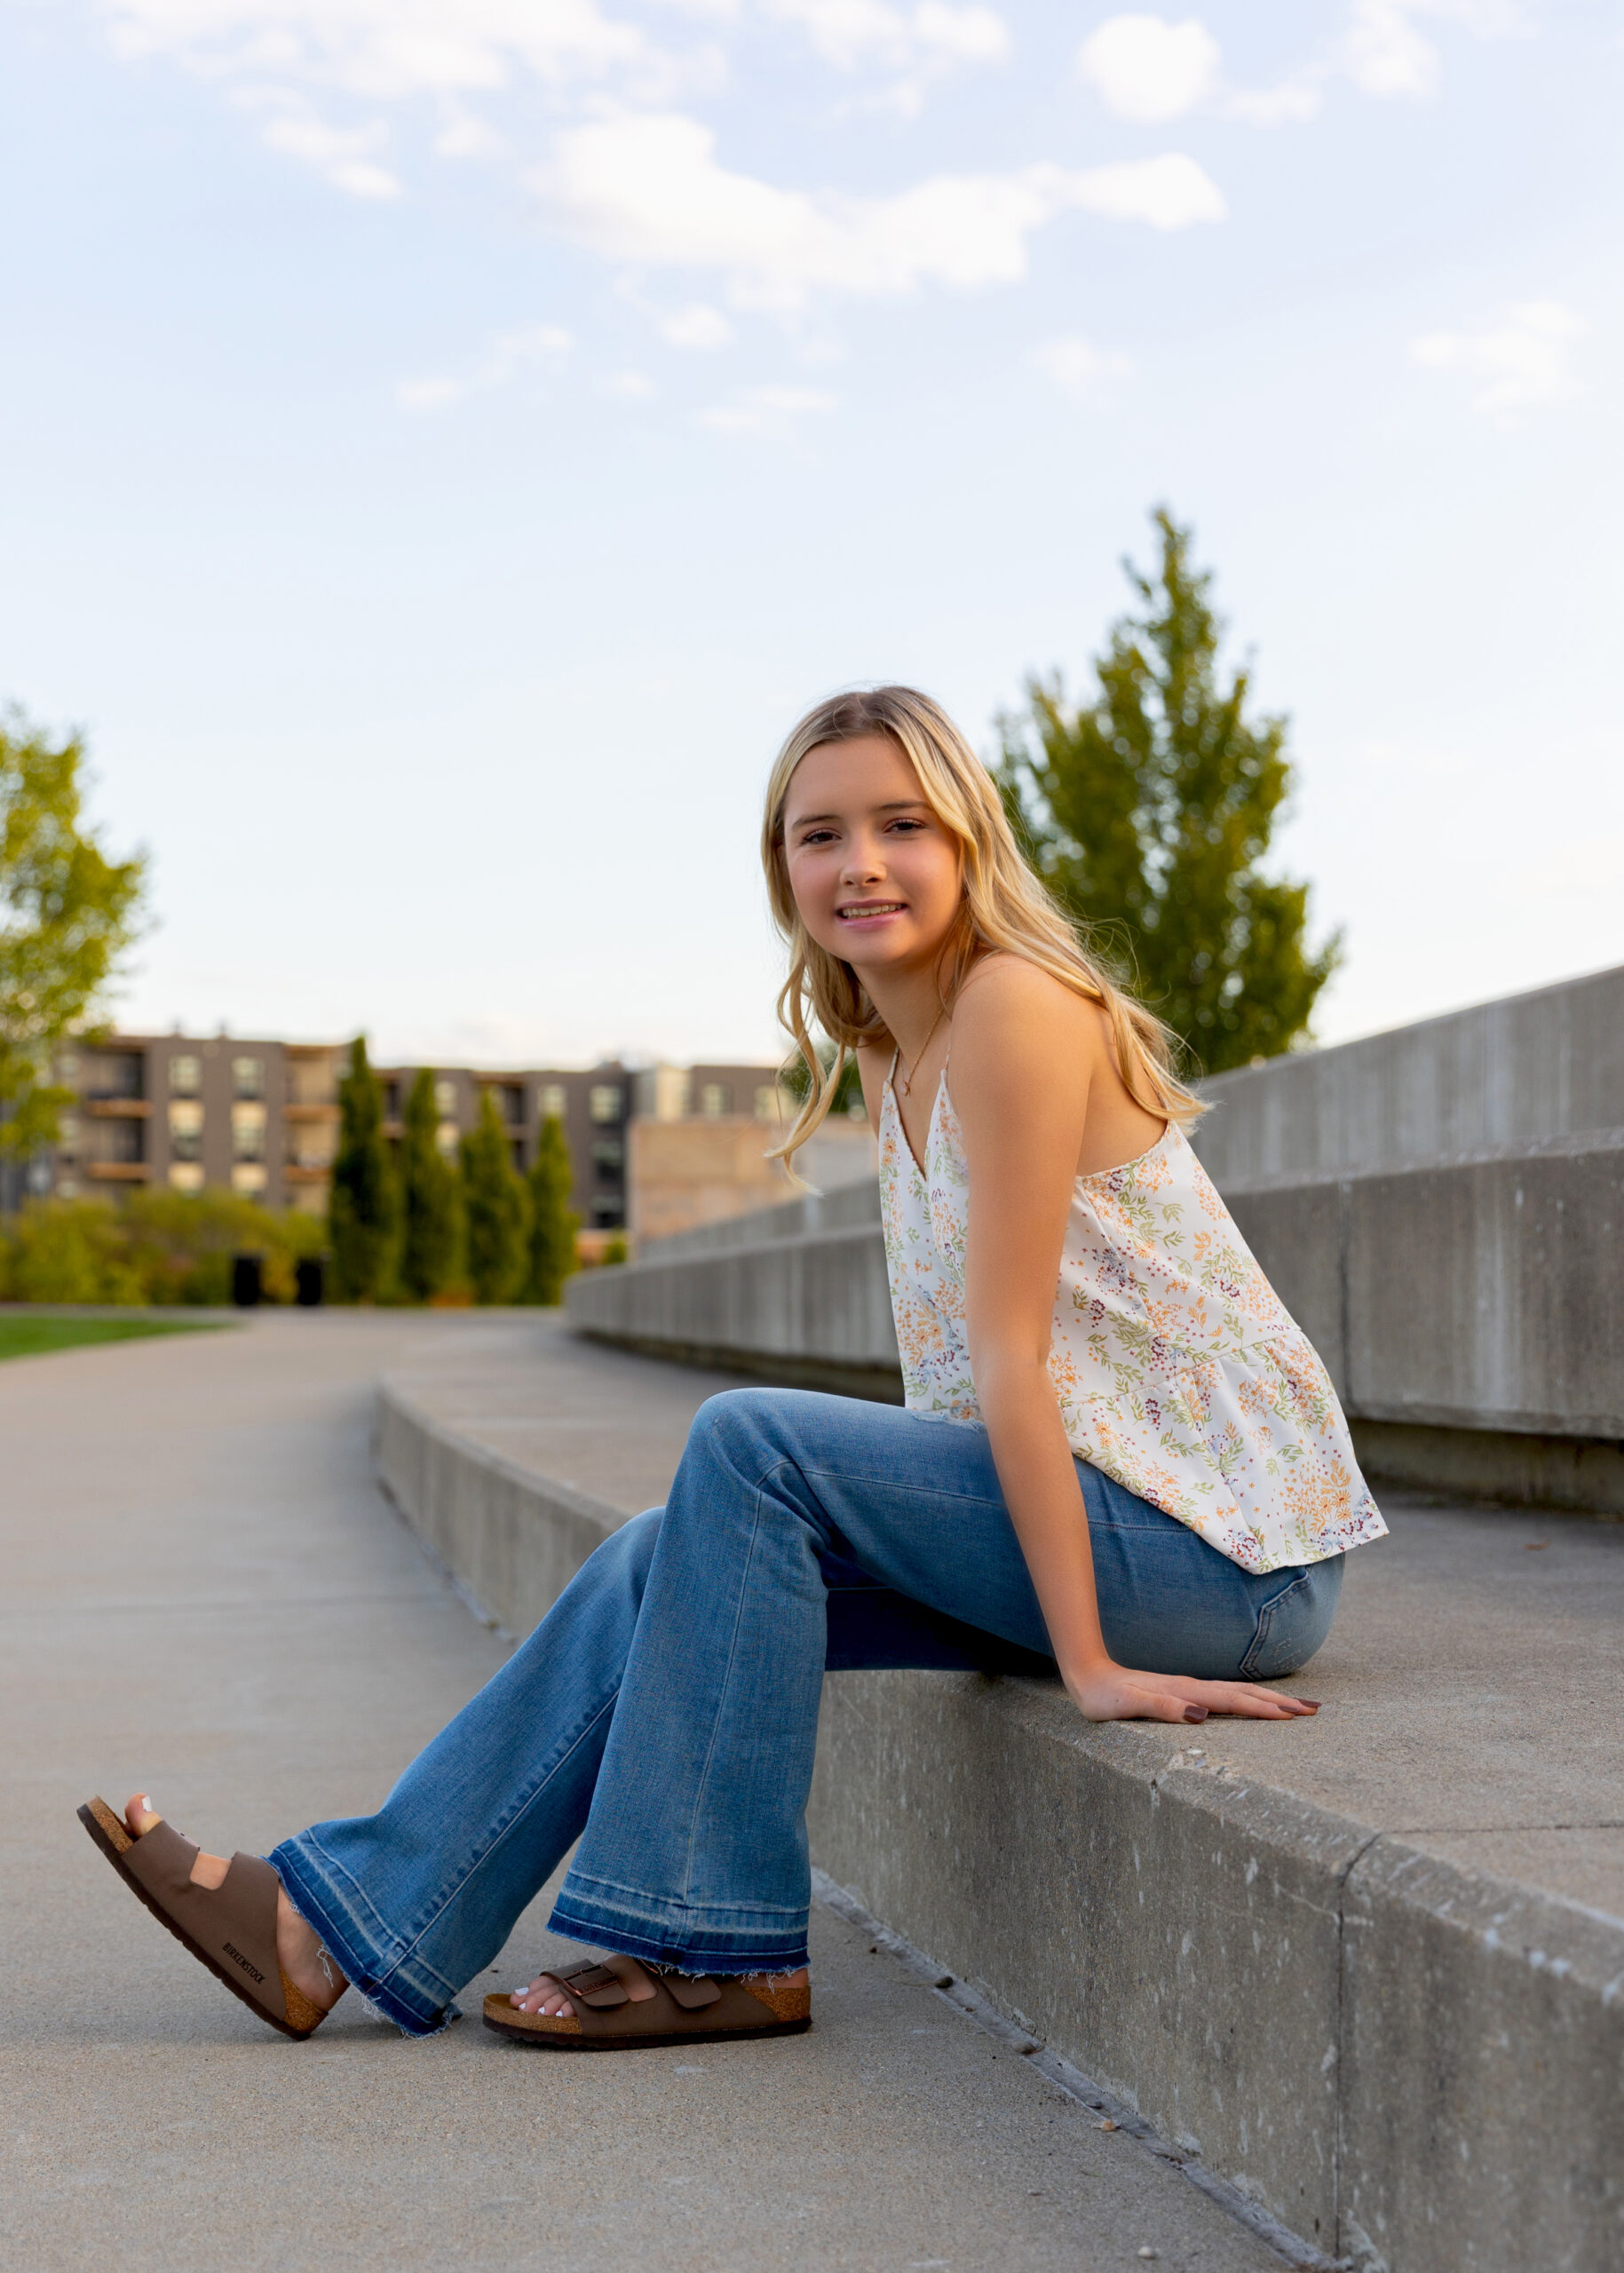 Young girl sitting on concrete steps outdoors.